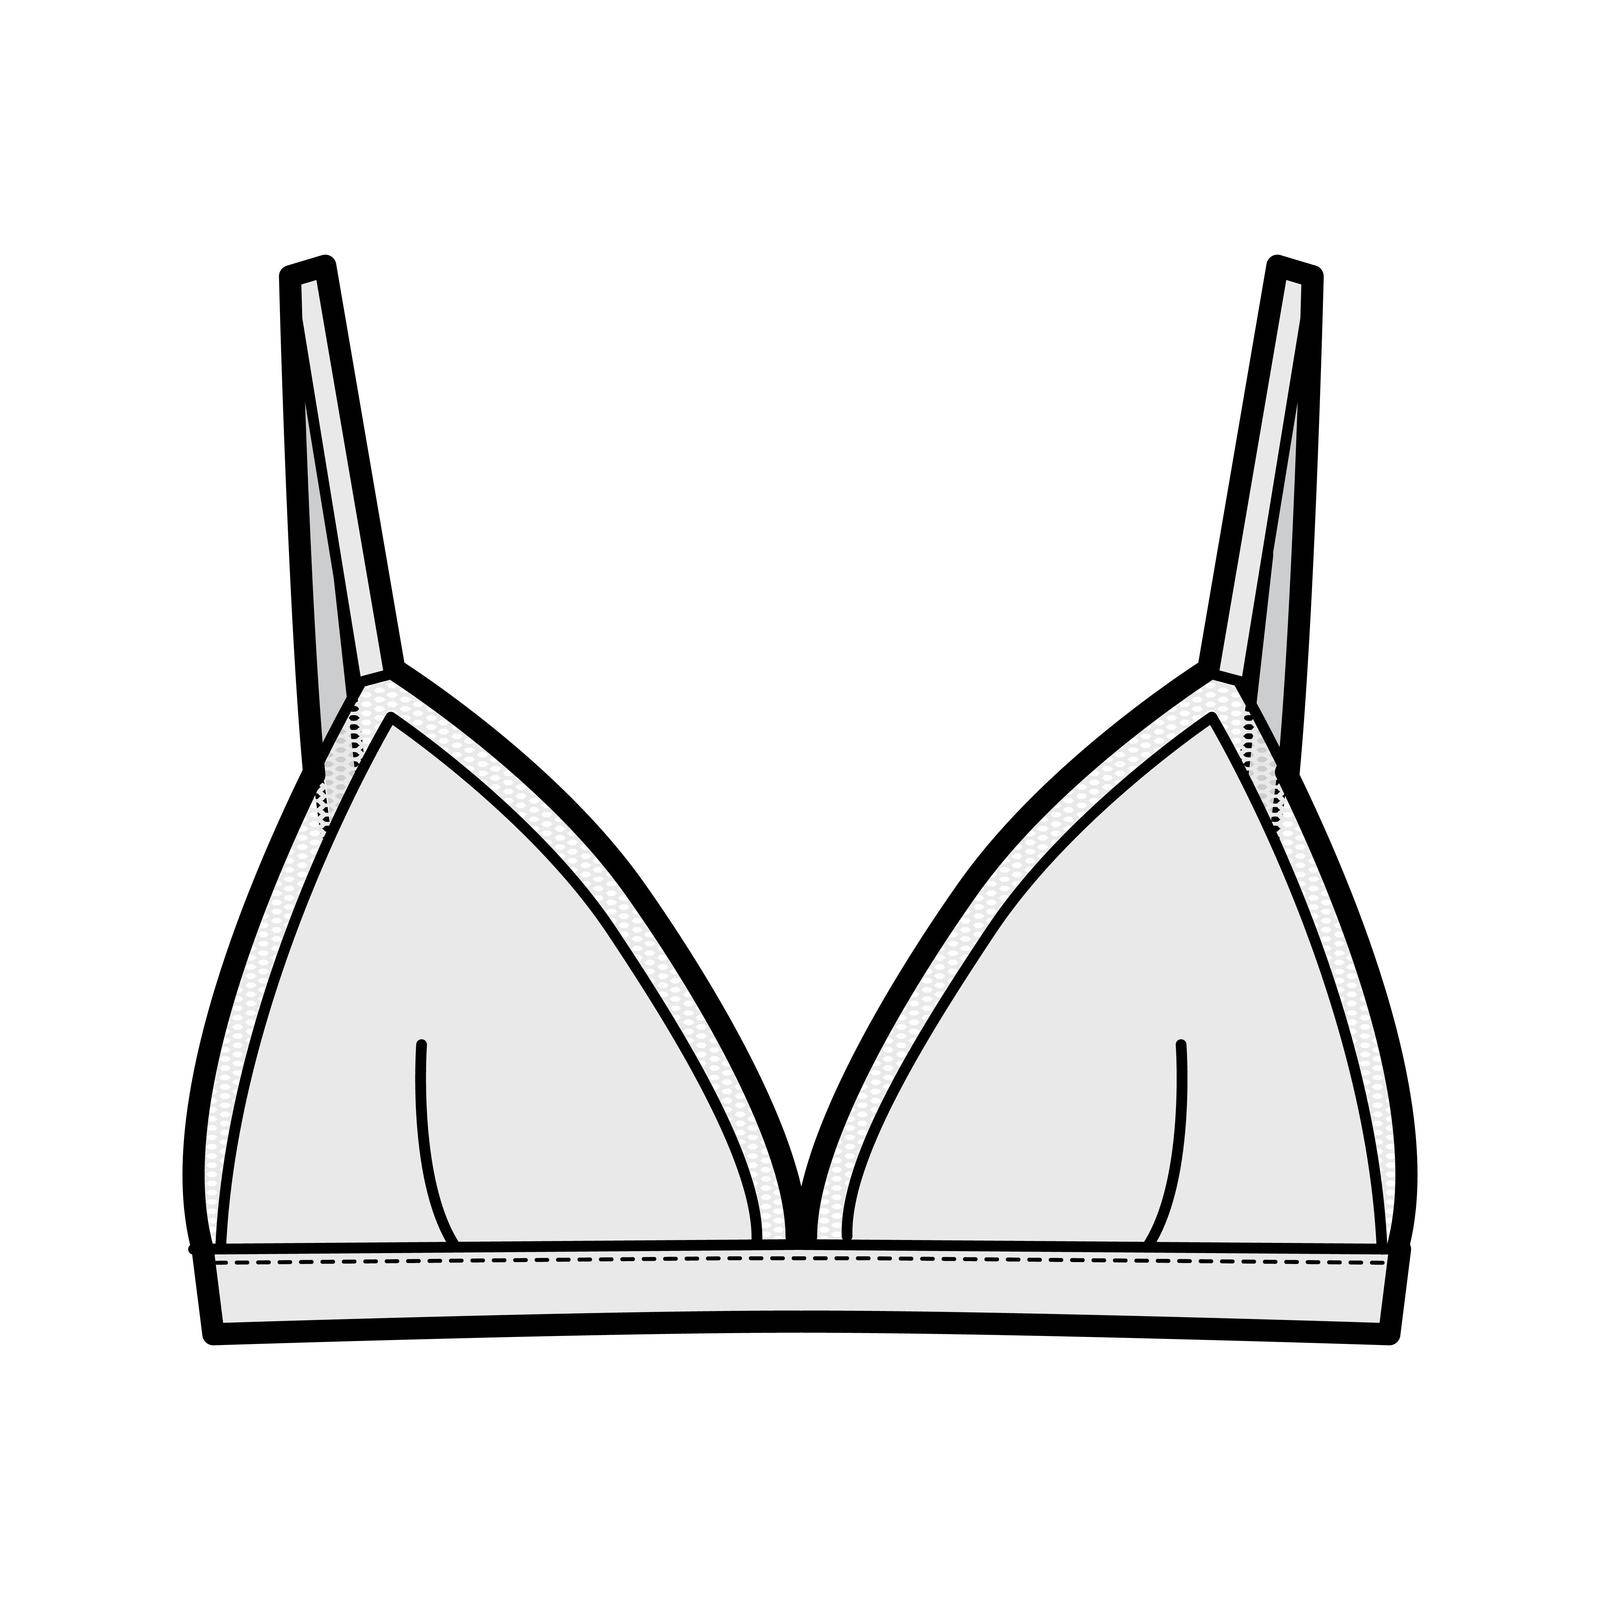 Triangle Bra lingerie technical fashion illustration with adjustable straps, hook-and-eye closure, sheer edge cups. Flat by Vectoressa